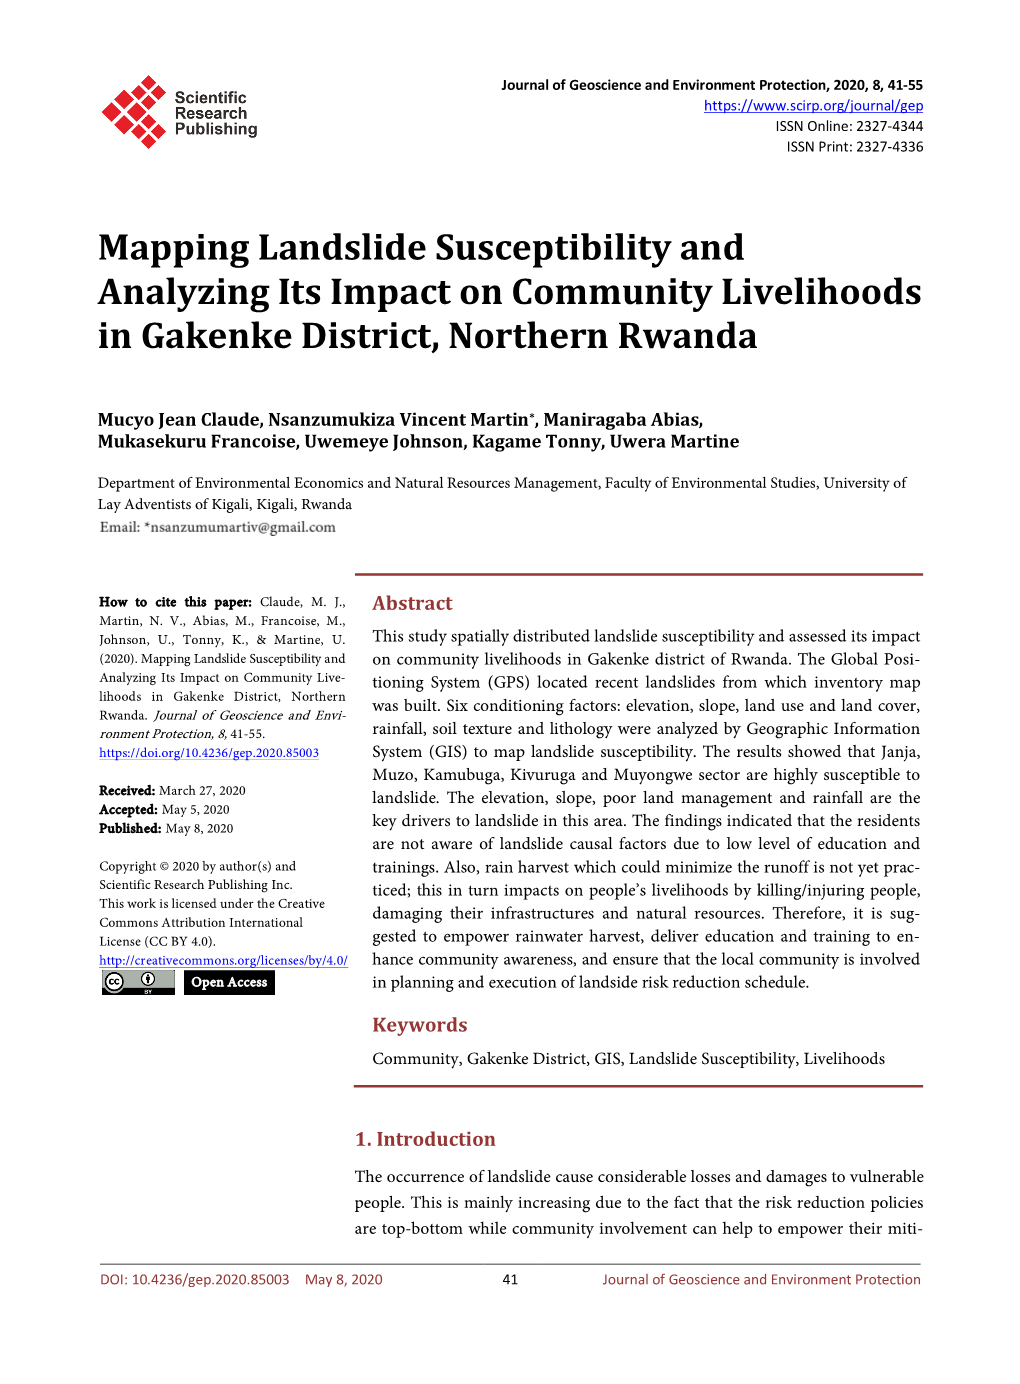 Mapping Landslide Susceptibility and Analyzing Its Impact on Community Livelihoods in Gakenke District, Northern Rwanda